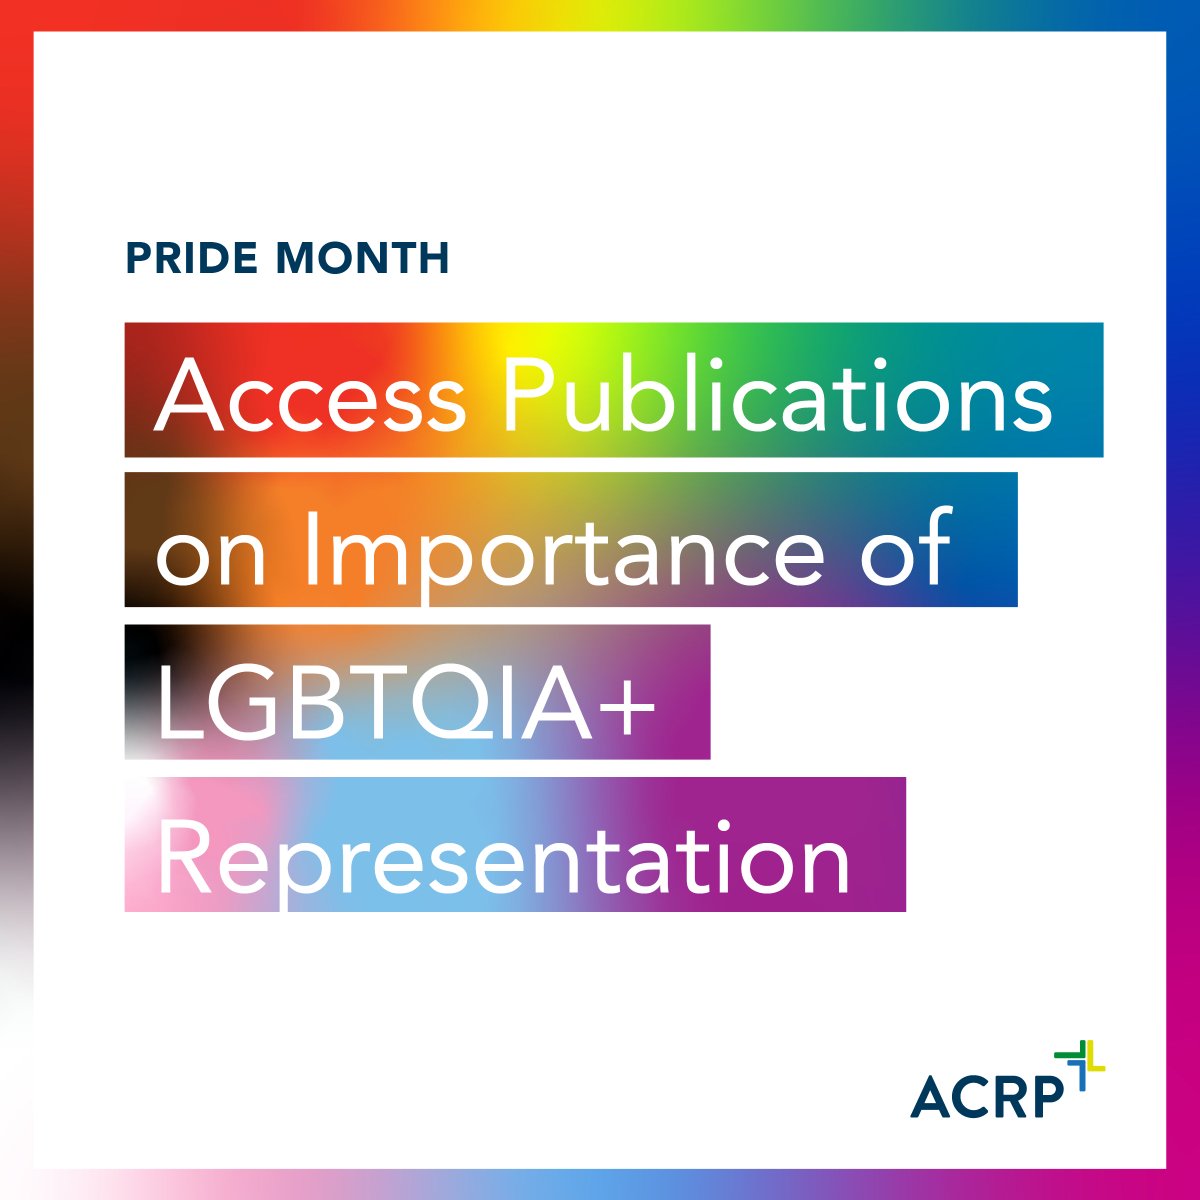 ACRP has curated recent research findings and perspectives on the importance of representation of the LGBTQIA+ community in a variety of clinical settings > bit.ly/3paWOHt

#PrideMonth #LGBTQIA #GenderIdentity #GenderData #AccessToHealthcare #LGBTQIAInclusion